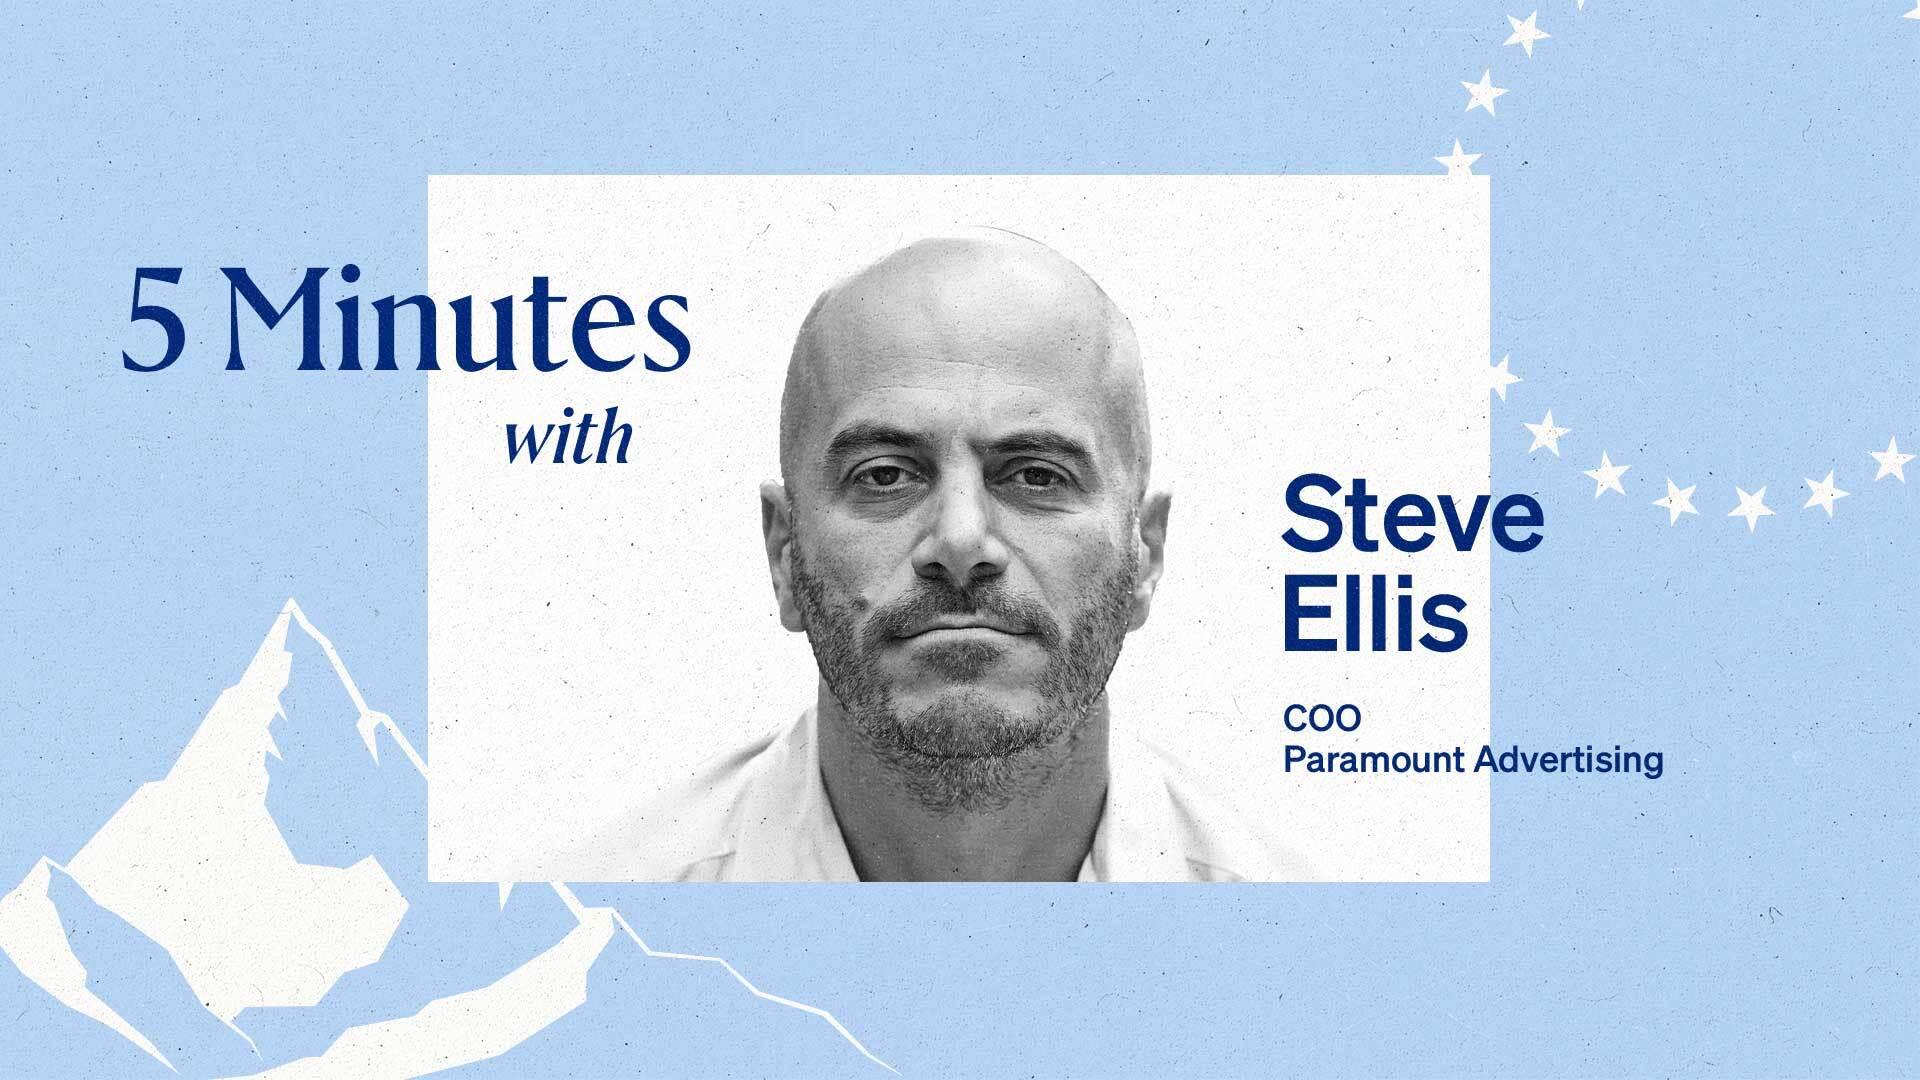 5 Minutes with Steve Ellis, COO Paramount Advertising.